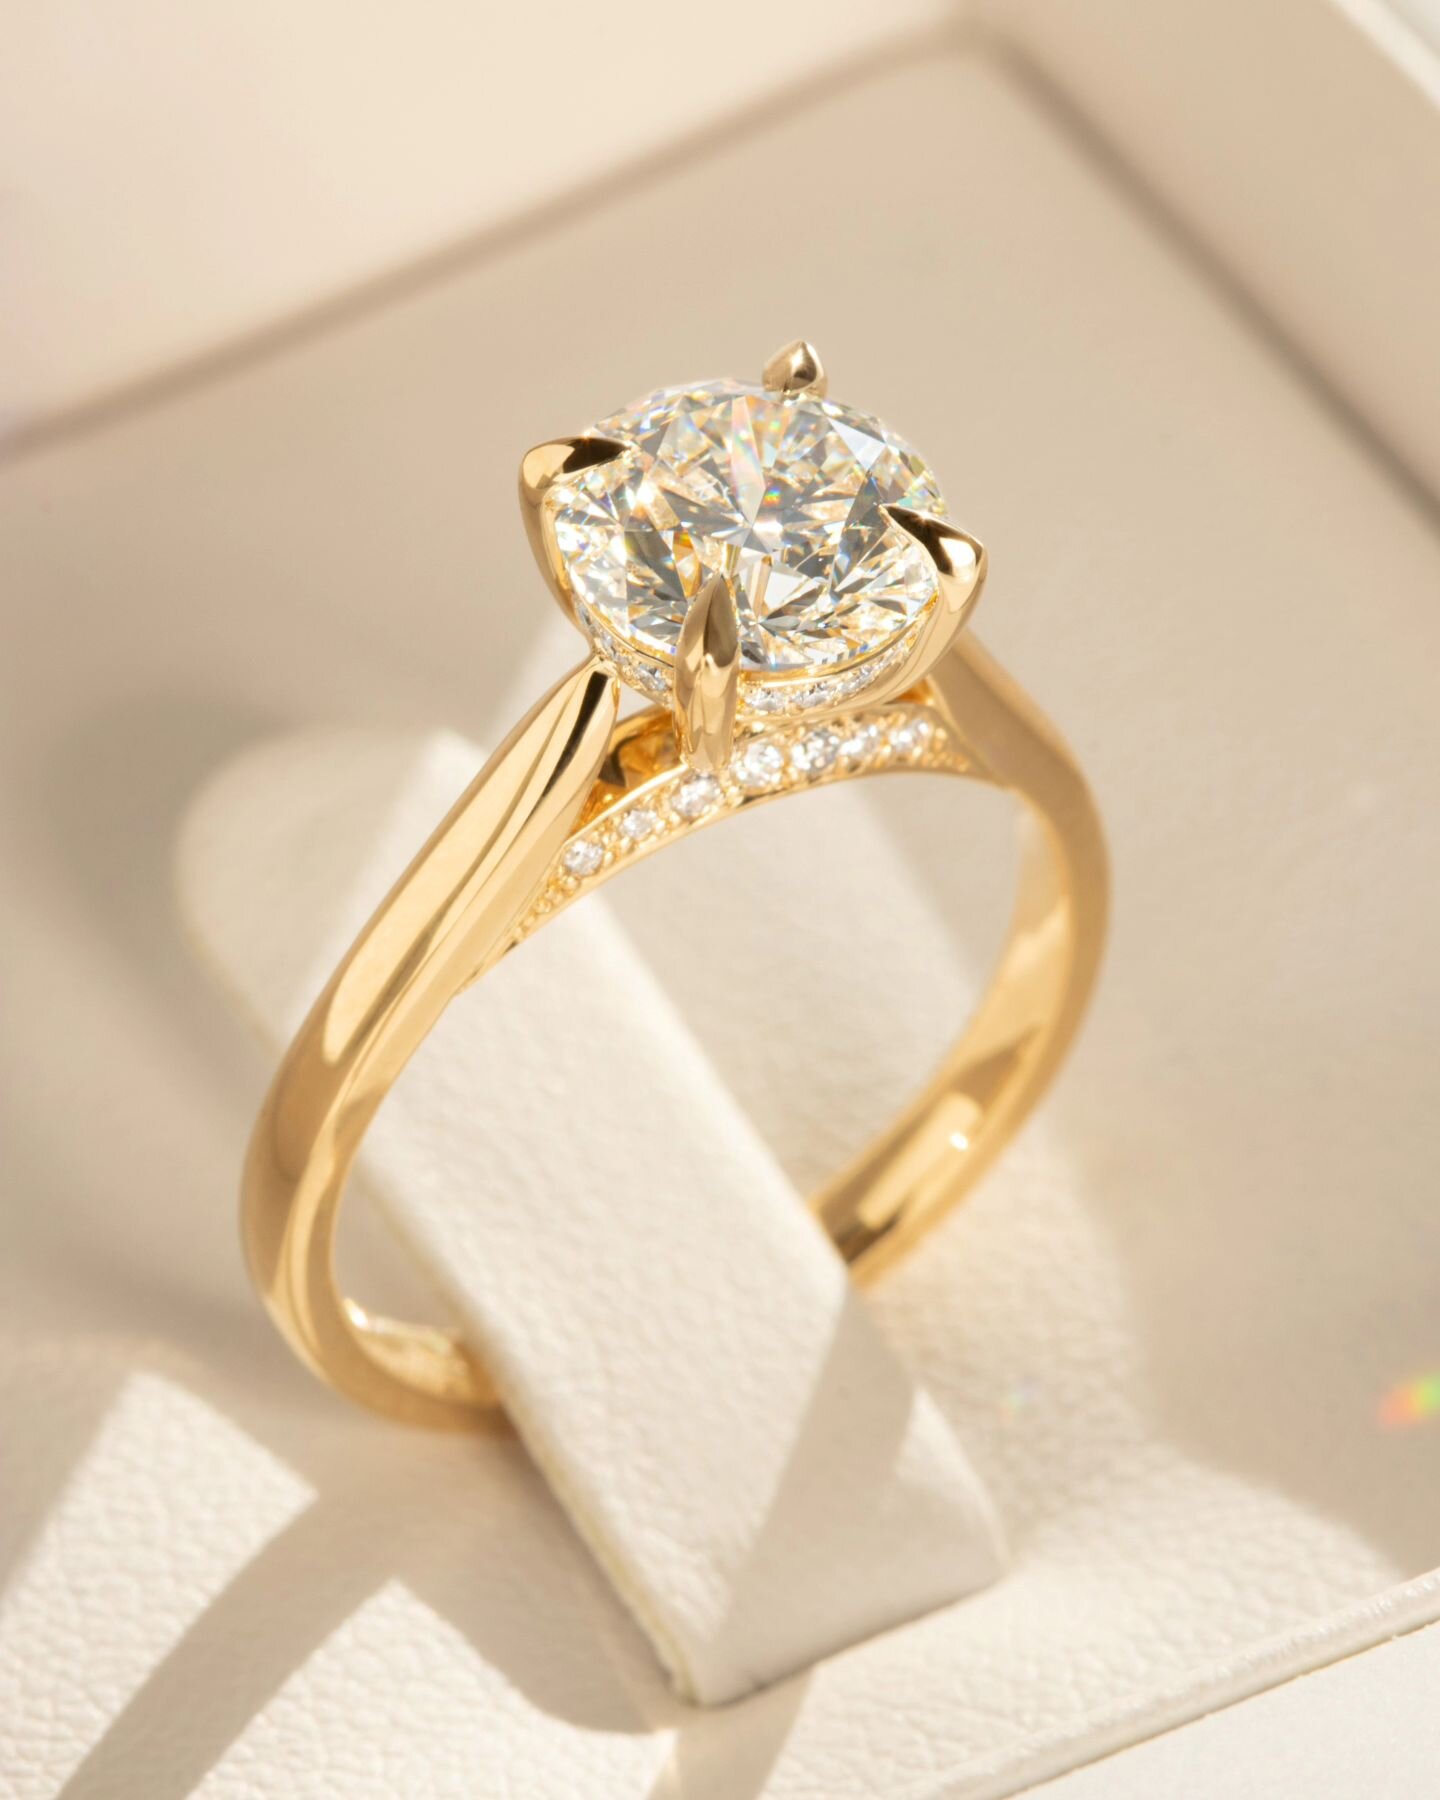 When the sun pops out just in time to get a super sparkly shot of this gorgeous Diamond and 18ct Yellow Gold engagement ring. With collet and bridge diamond details, this piece is designed to sparkle and created to last the test of time x